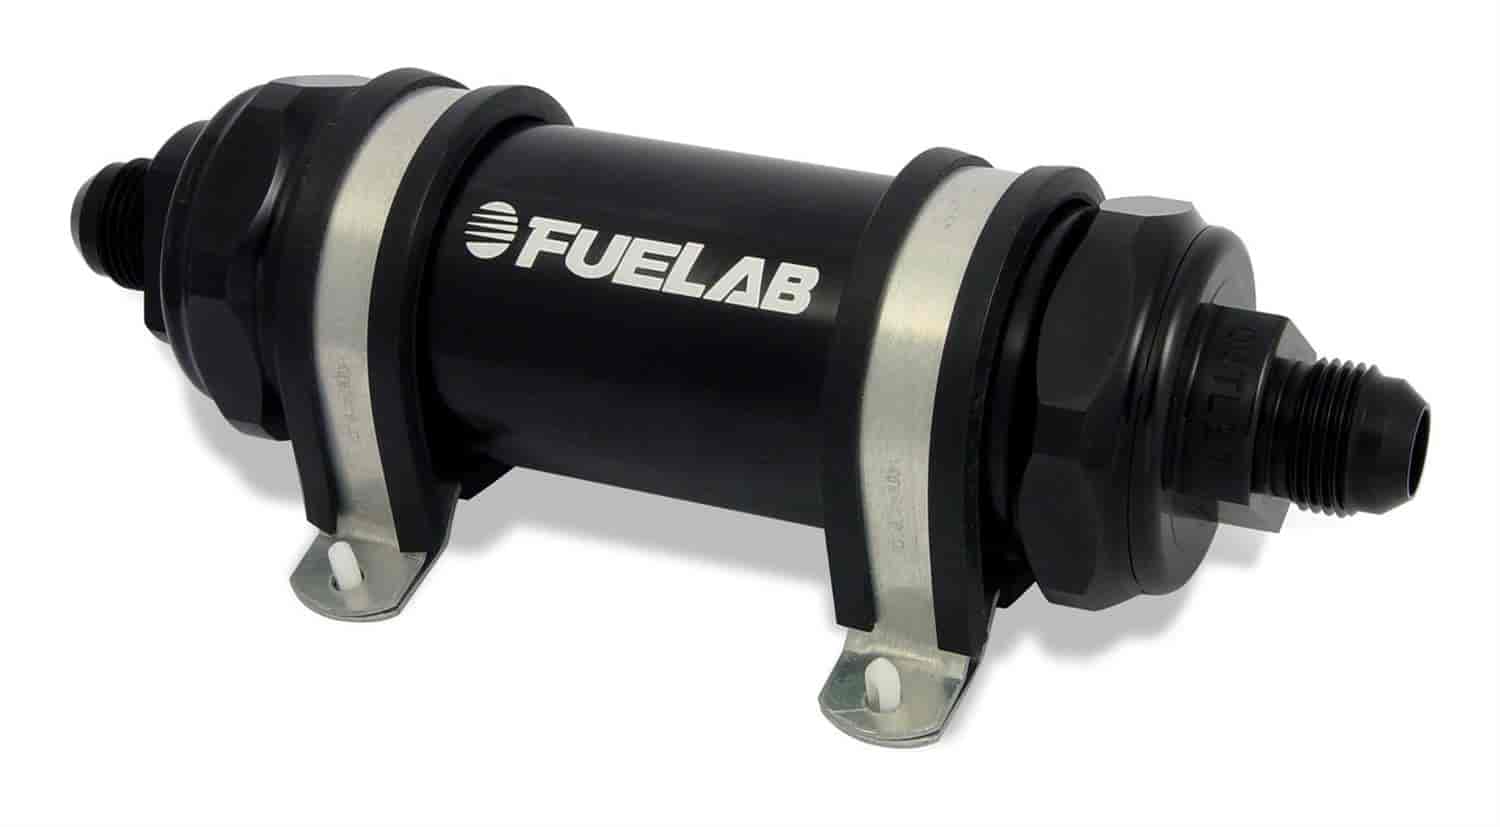 In-Line Fuel Filter Long Length -12AN Inlet/-8AN Outlet 75 micron stainless steel element